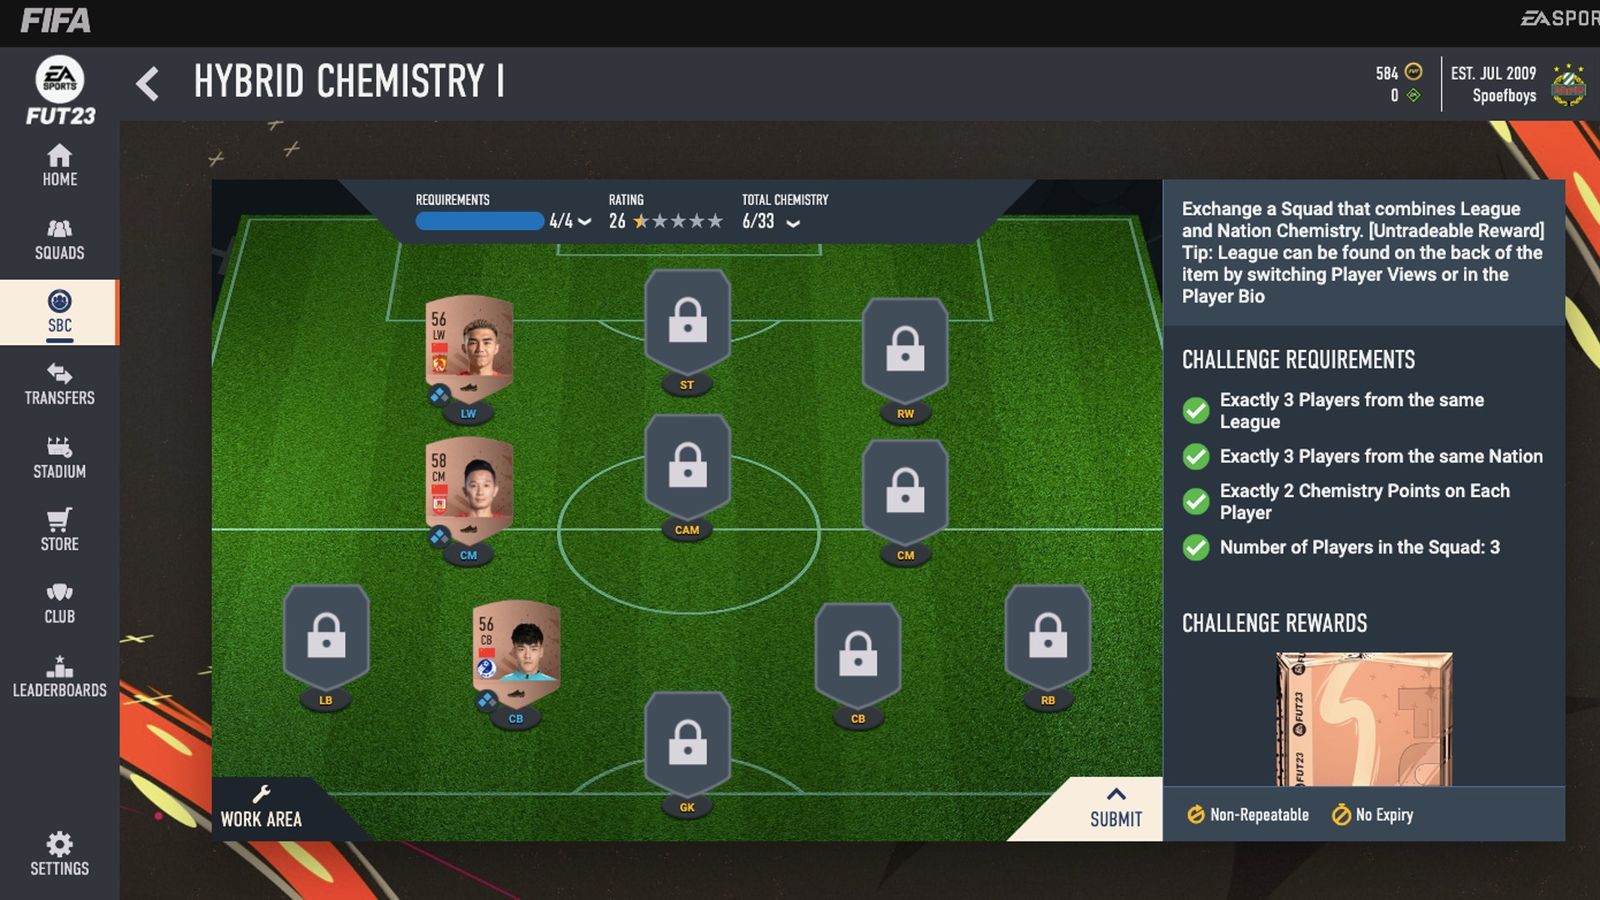 Image of the solution for Hybrid Chemistry I in FIFA 23.